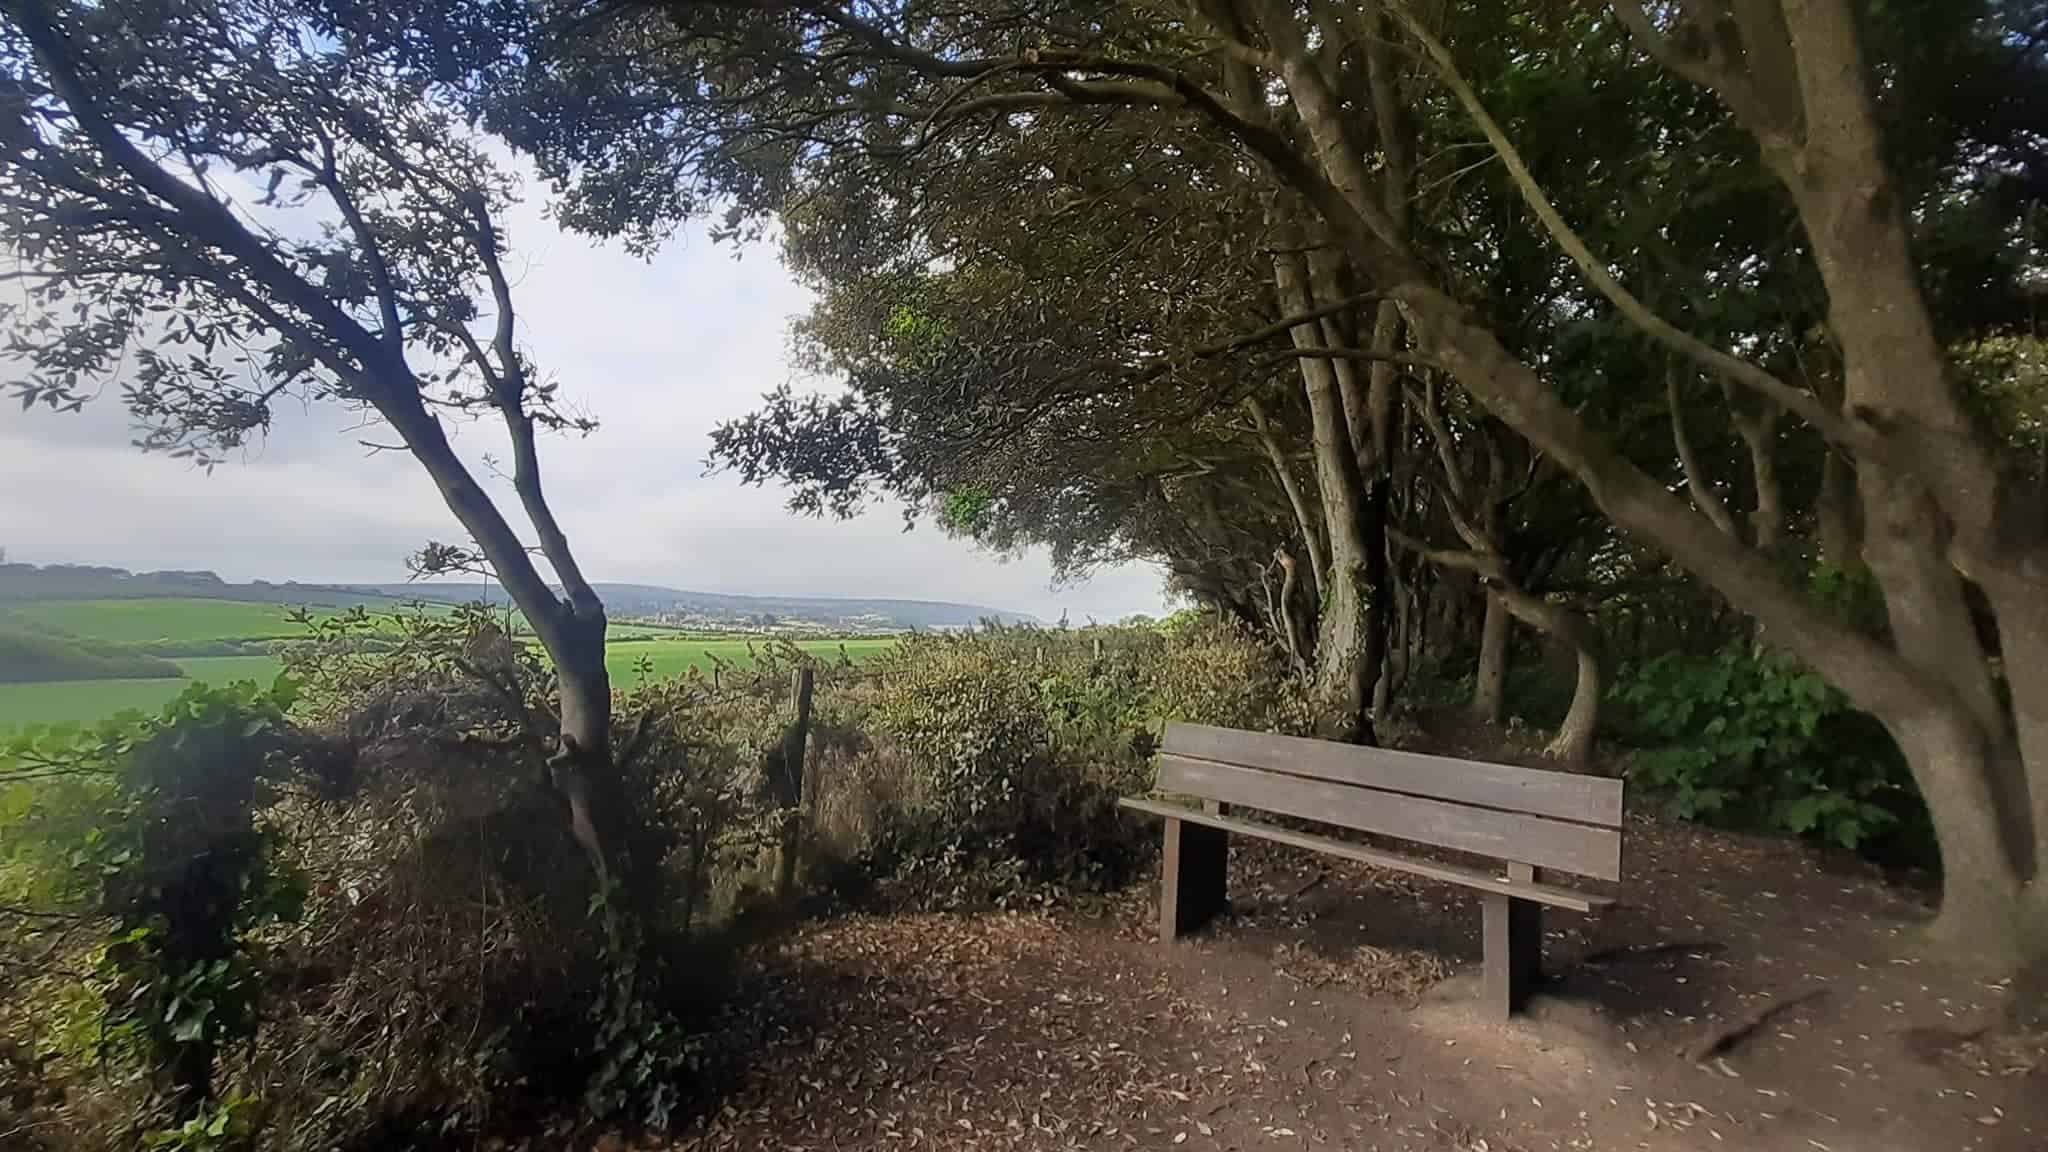 Bench and trees in Fort Victoria Country Park